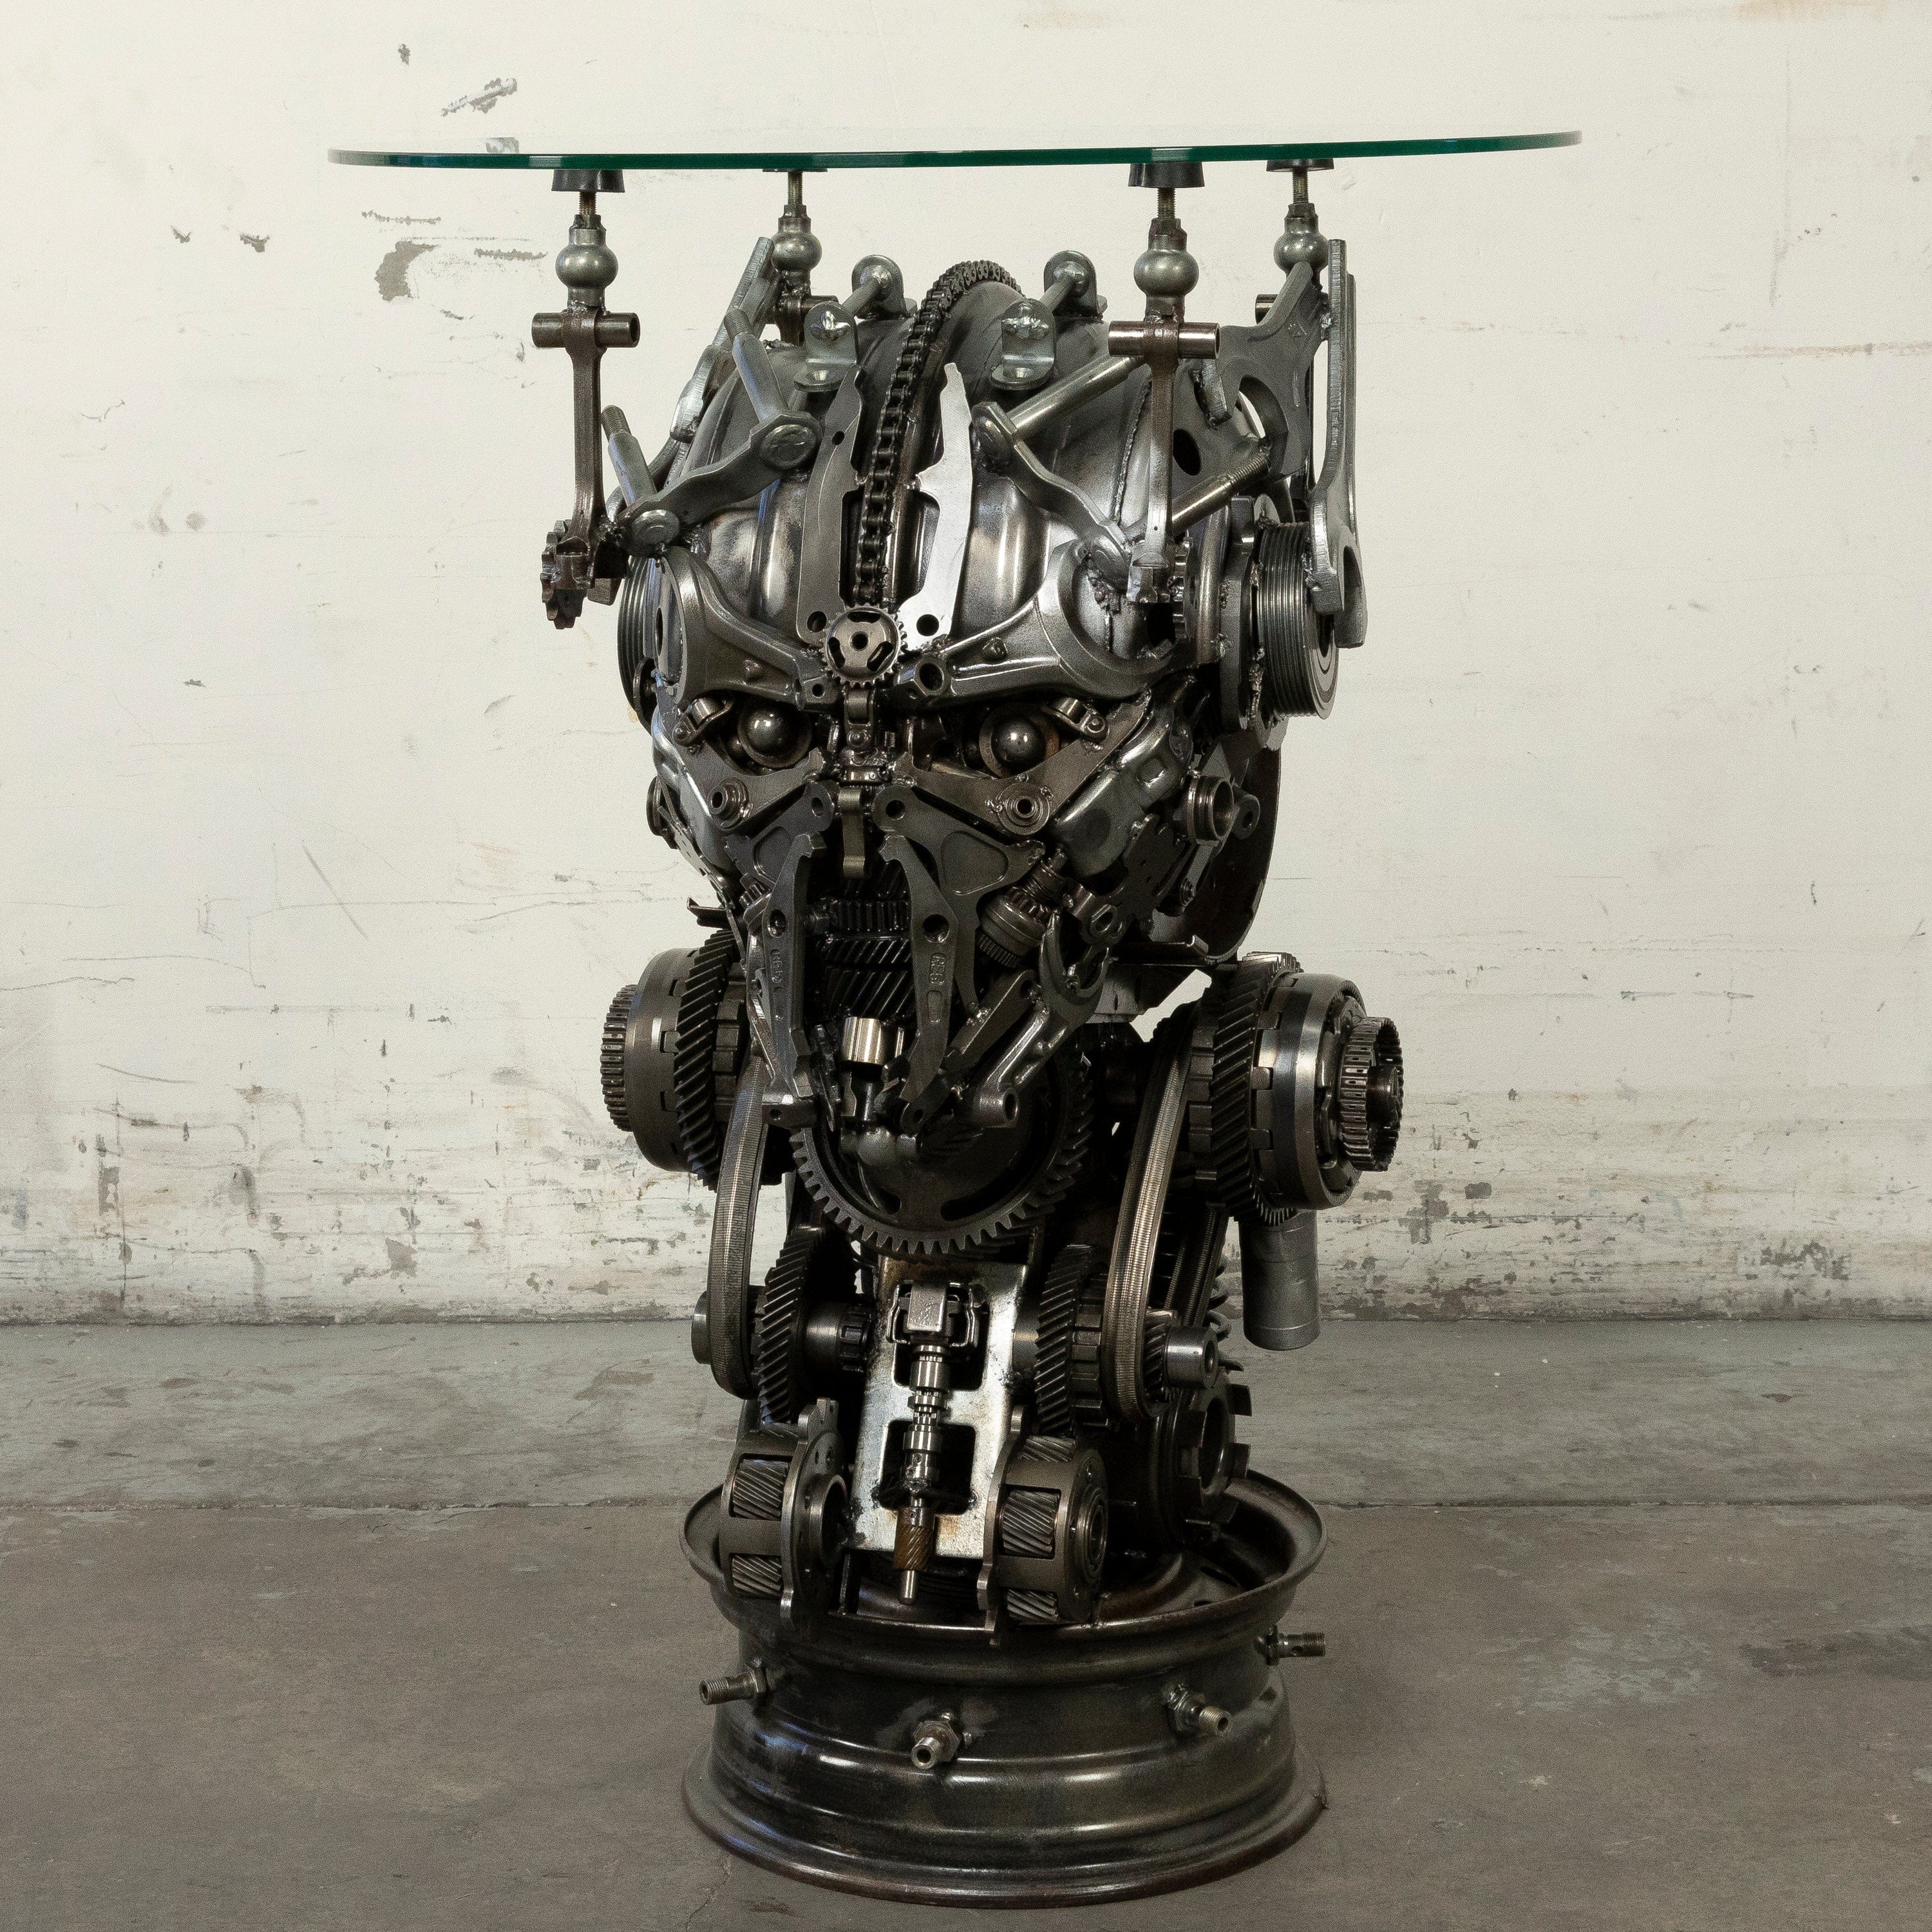 Kalifano Recycled Metal Art 36" Megatron Inspired Recycled Metal Sculpture Table RMS-MEGTAB90-S02